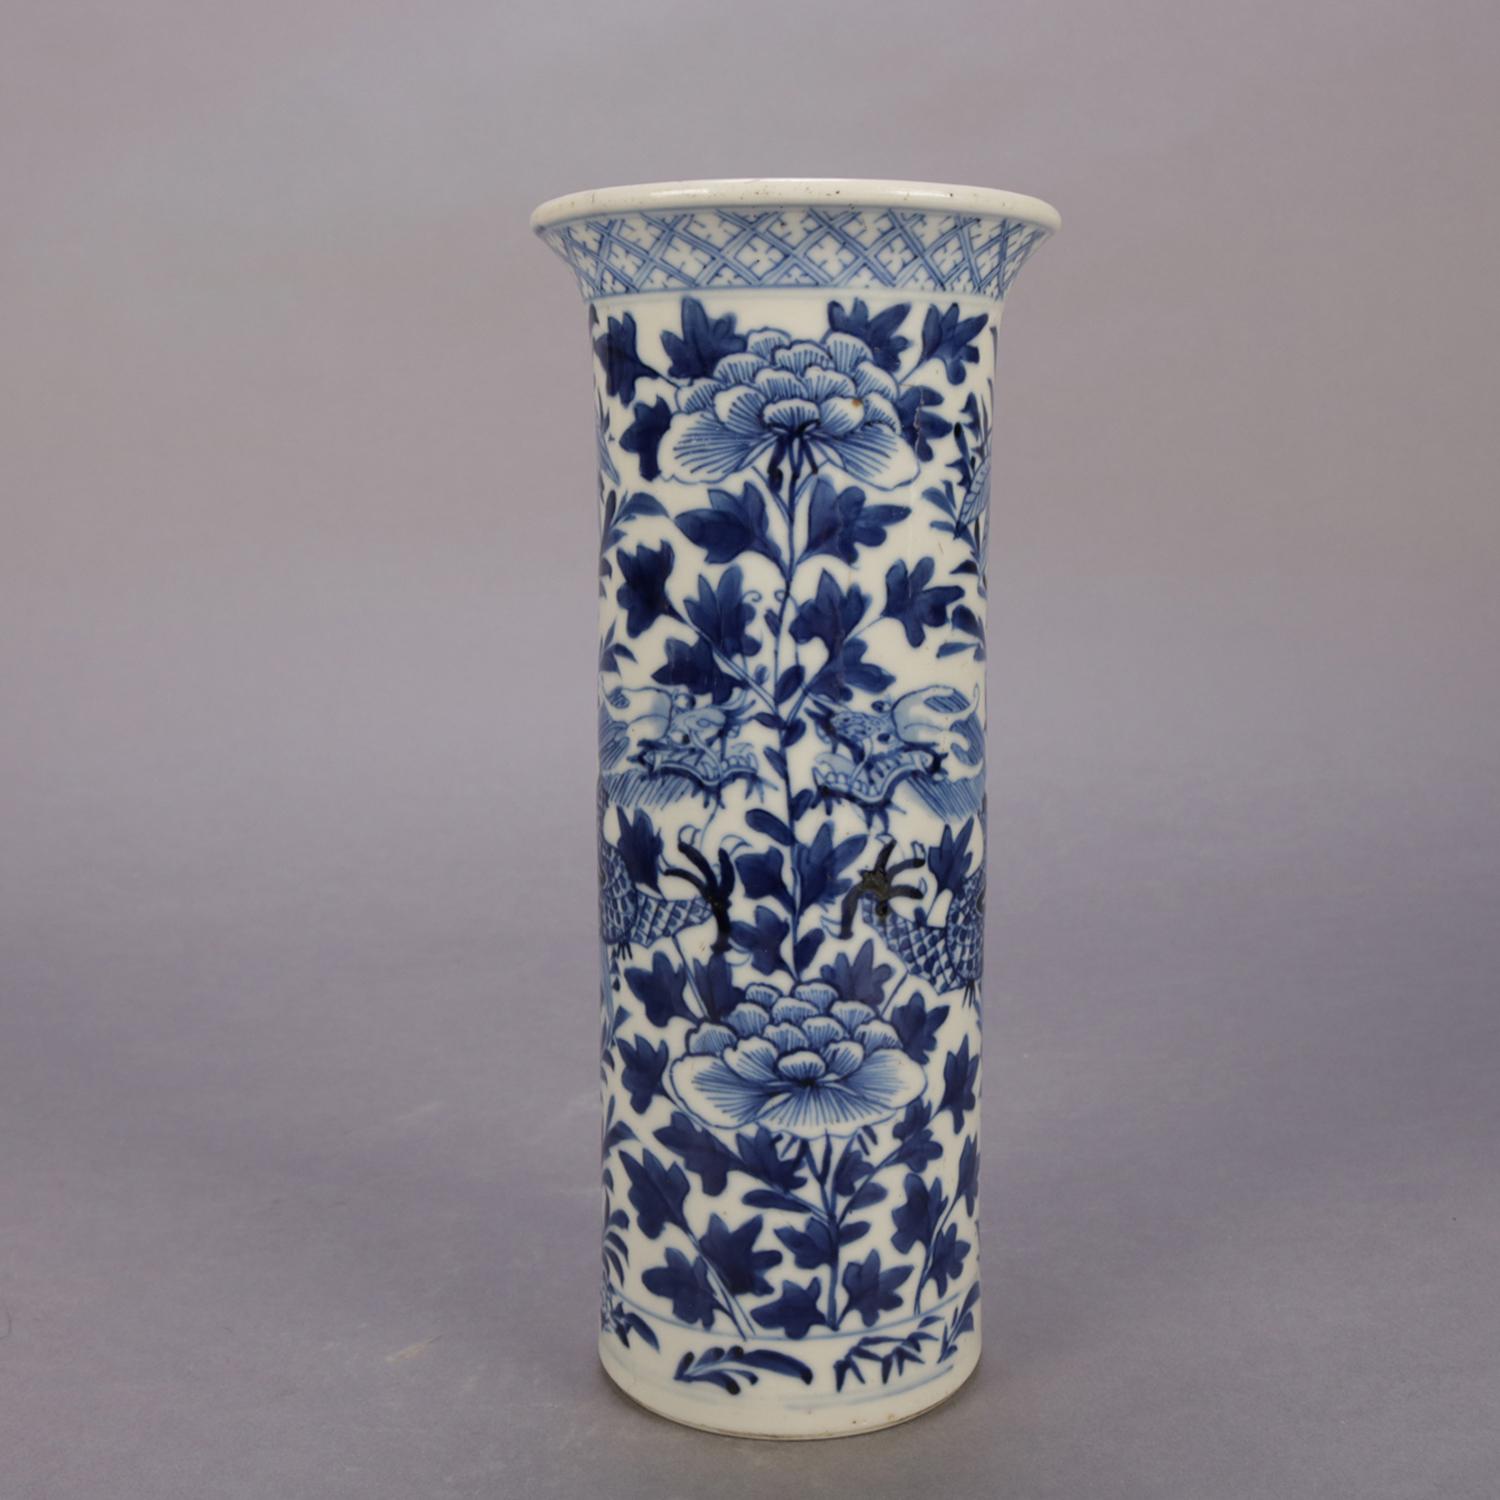 A Chinese blue and white Canton style porcelain vase features cylinder form with flared mouth and dragon and floral lotus decoration, chop mark signed on base, 20th century

Measures: 9.75